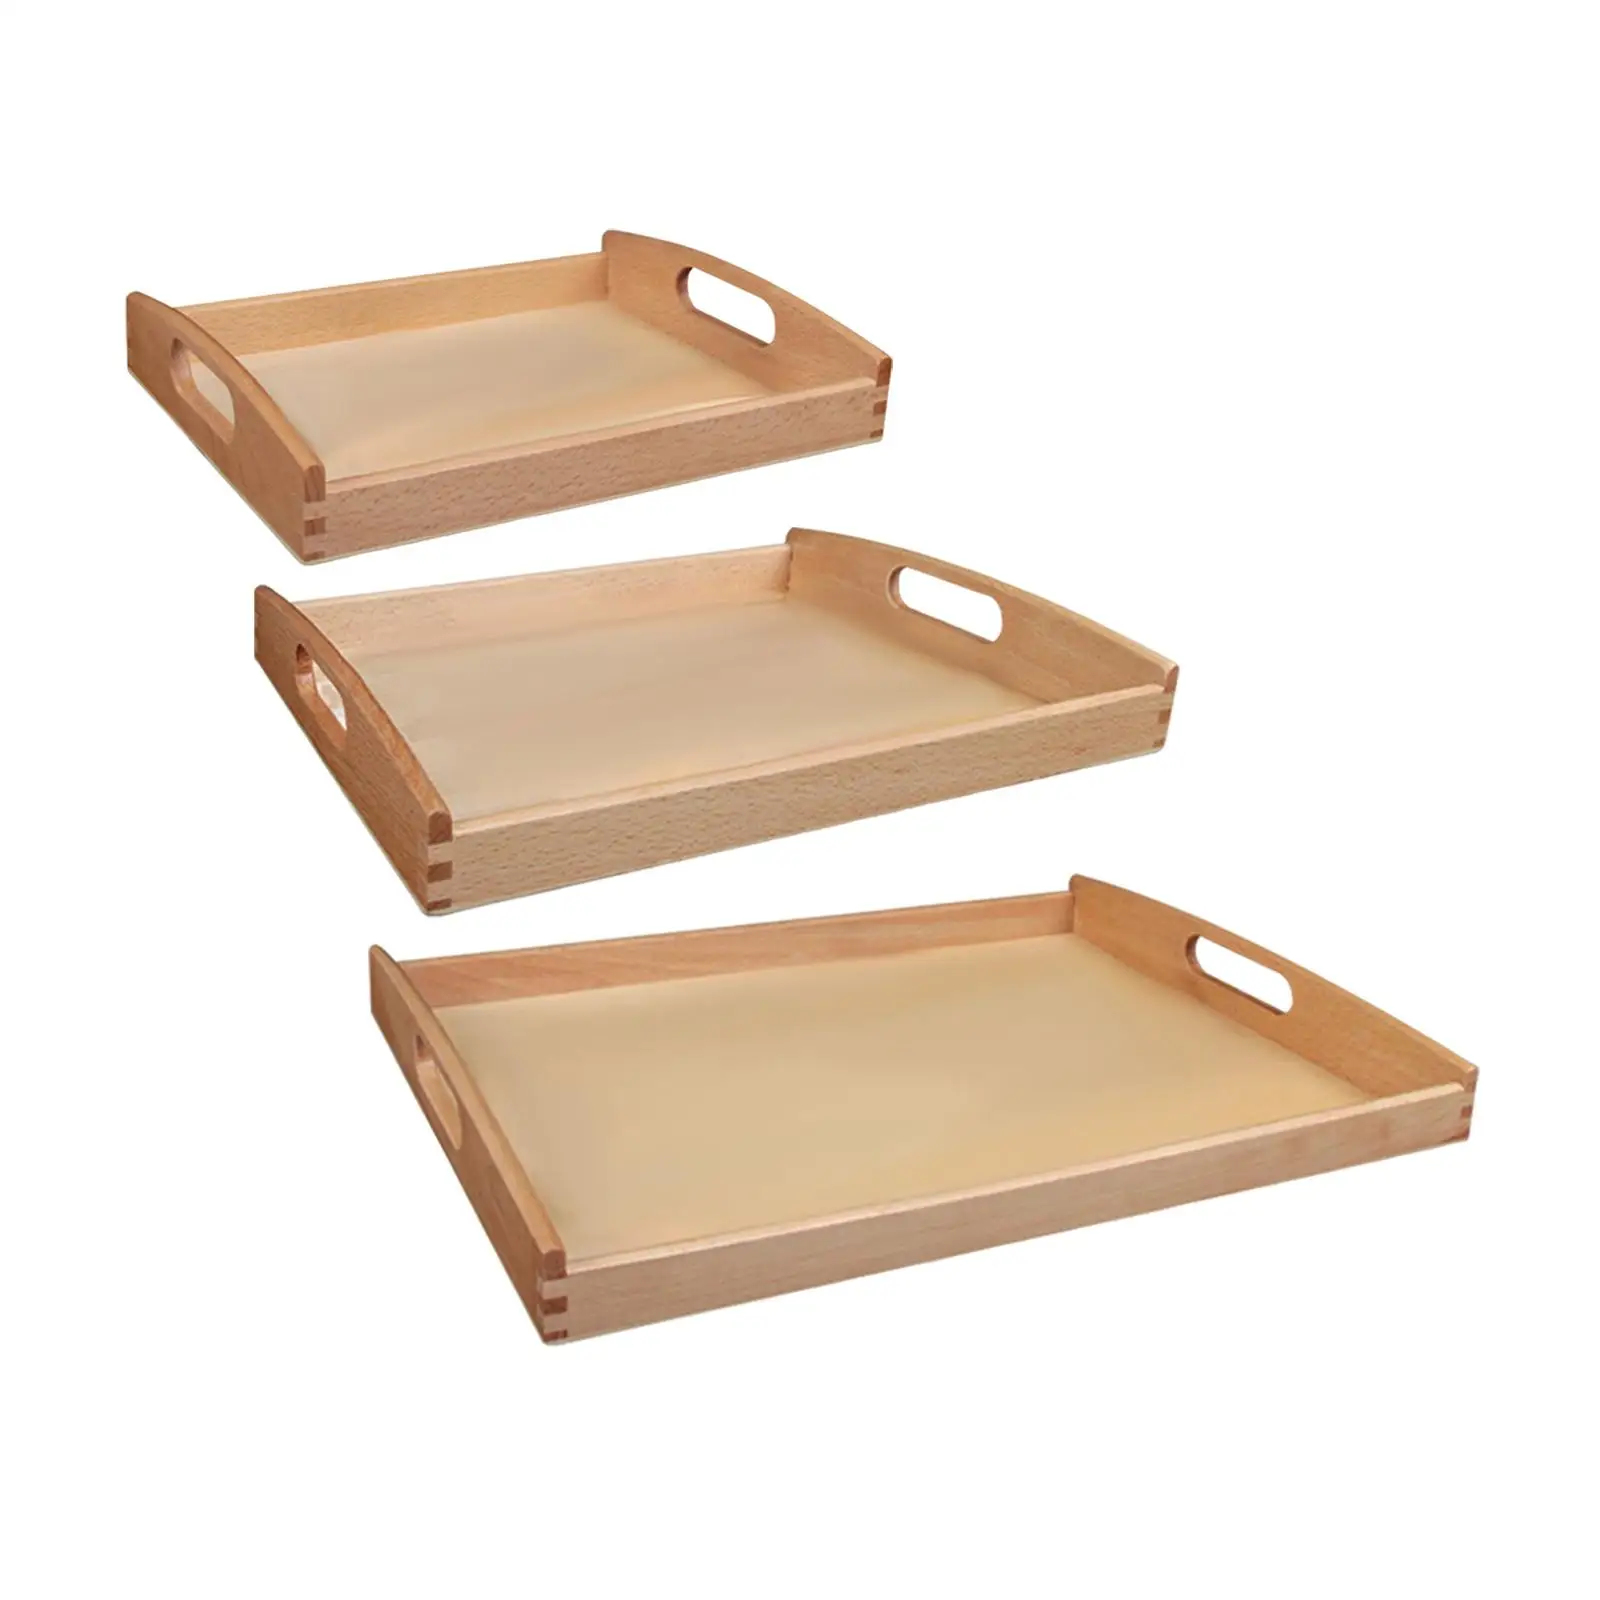 Wooden Montessori Tray Rectangular Shape with Handle Education Toys Unfinished for Kitchen